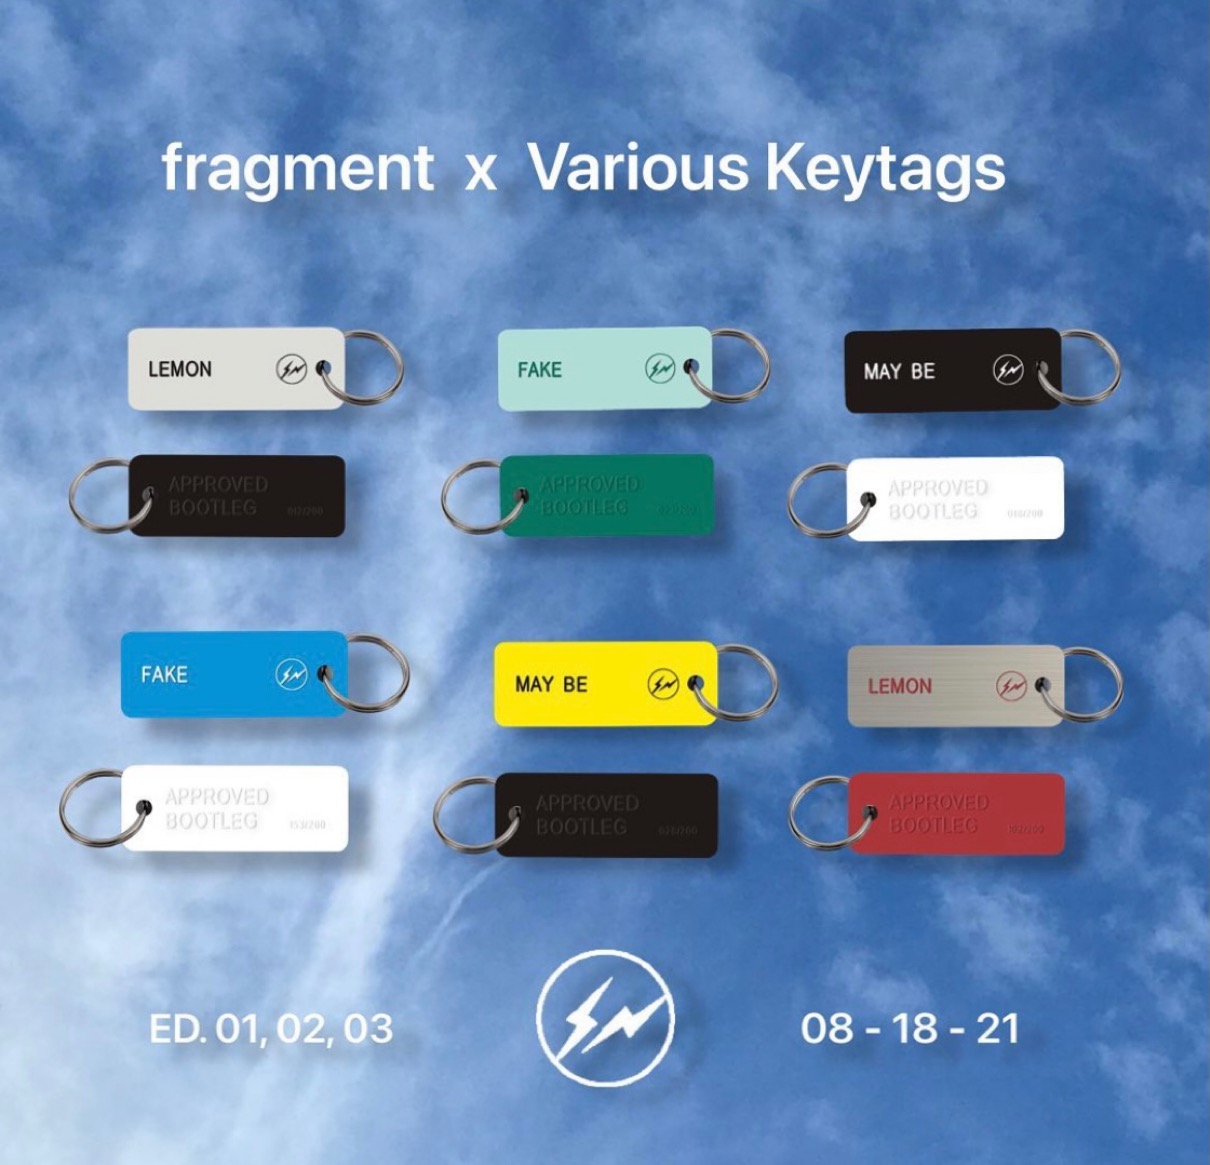 FRAGMENT × Various Keytags】コラボキータグが8月18日に発売予定 | UP TO DATE